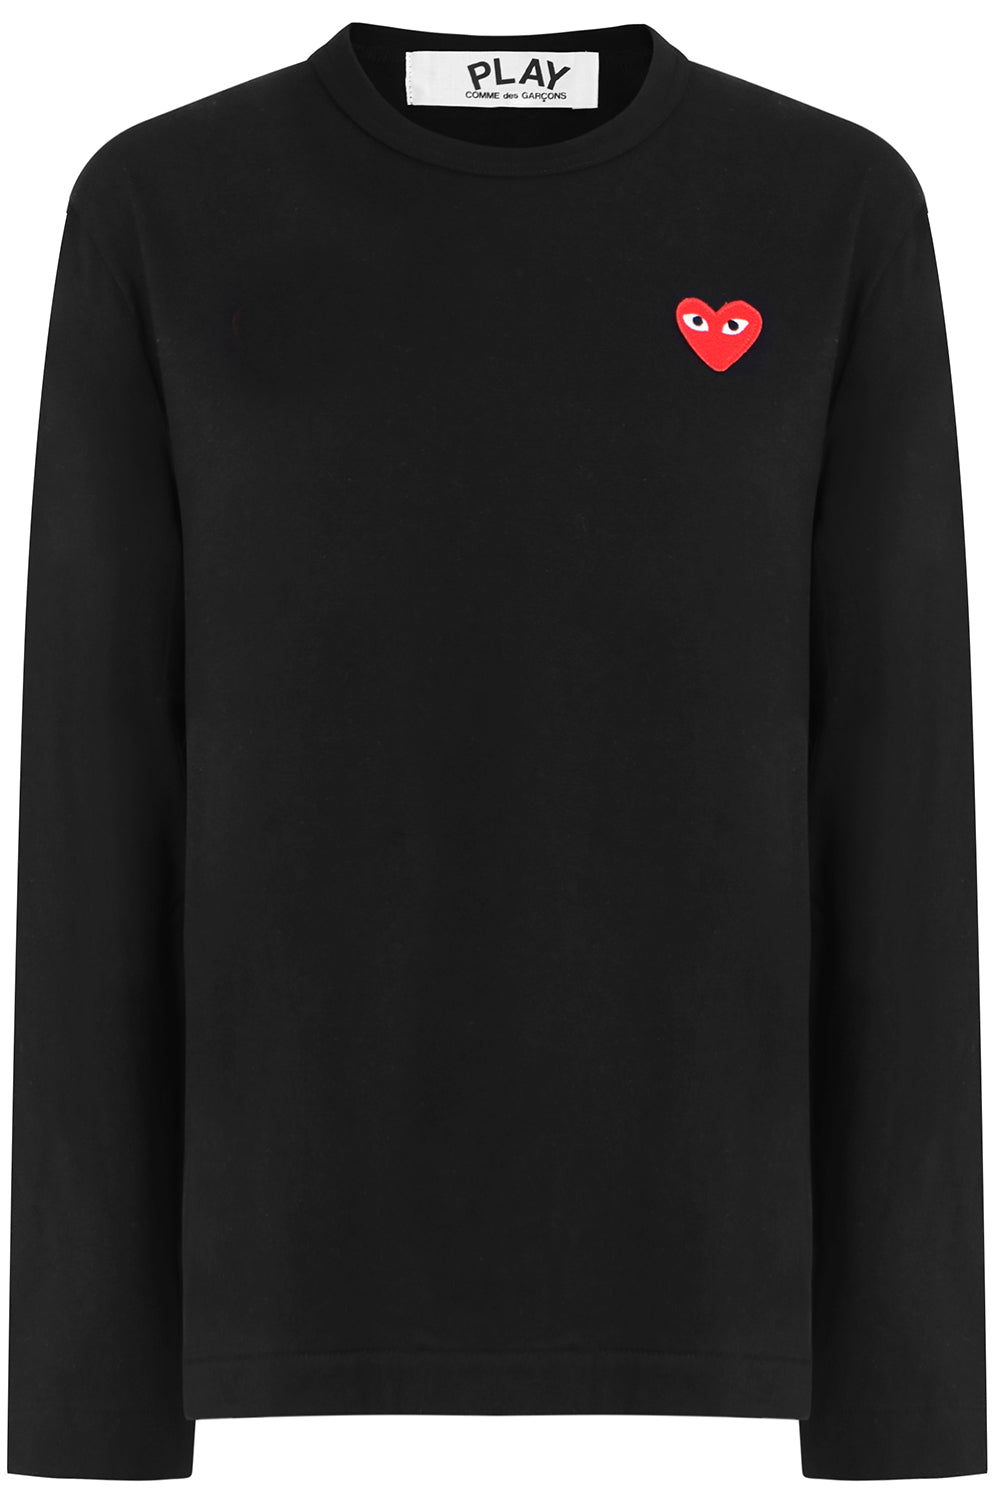 COMME DES GARCONS PLAY RTW PLAY MENS T-SHIRT RED HEART L/S BLACK